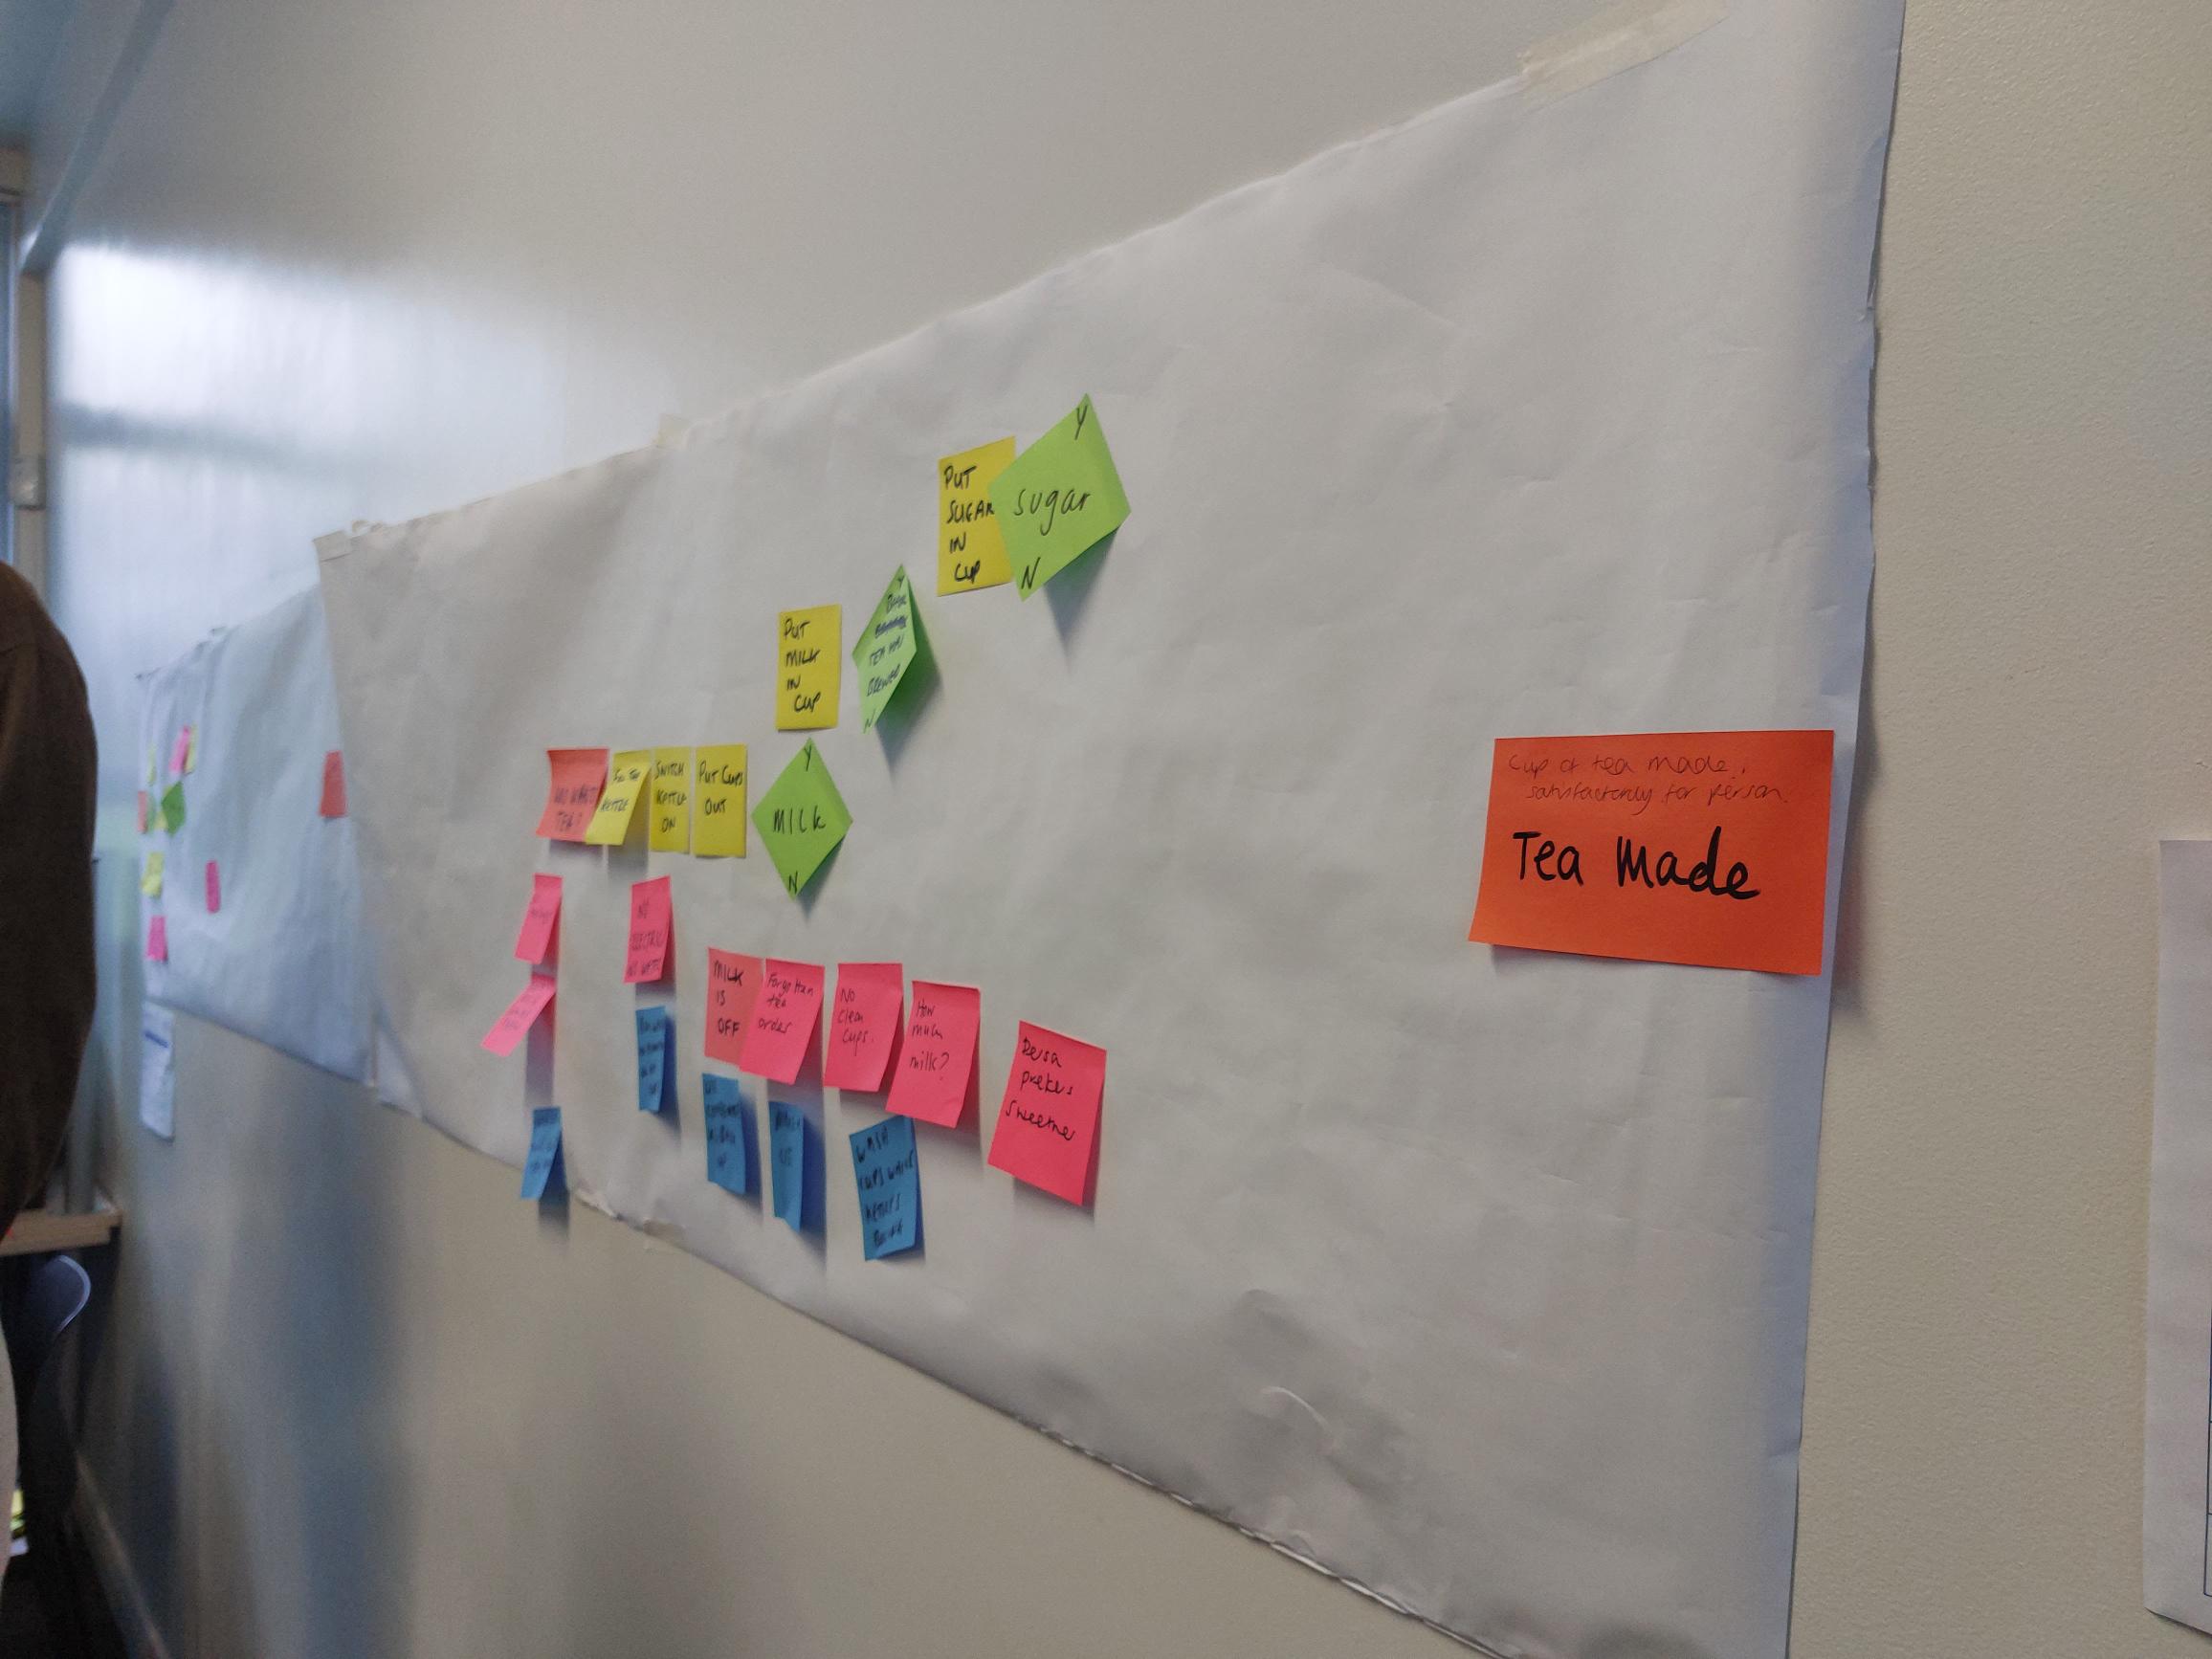 Quality Improvement tool with sticky notes on wall